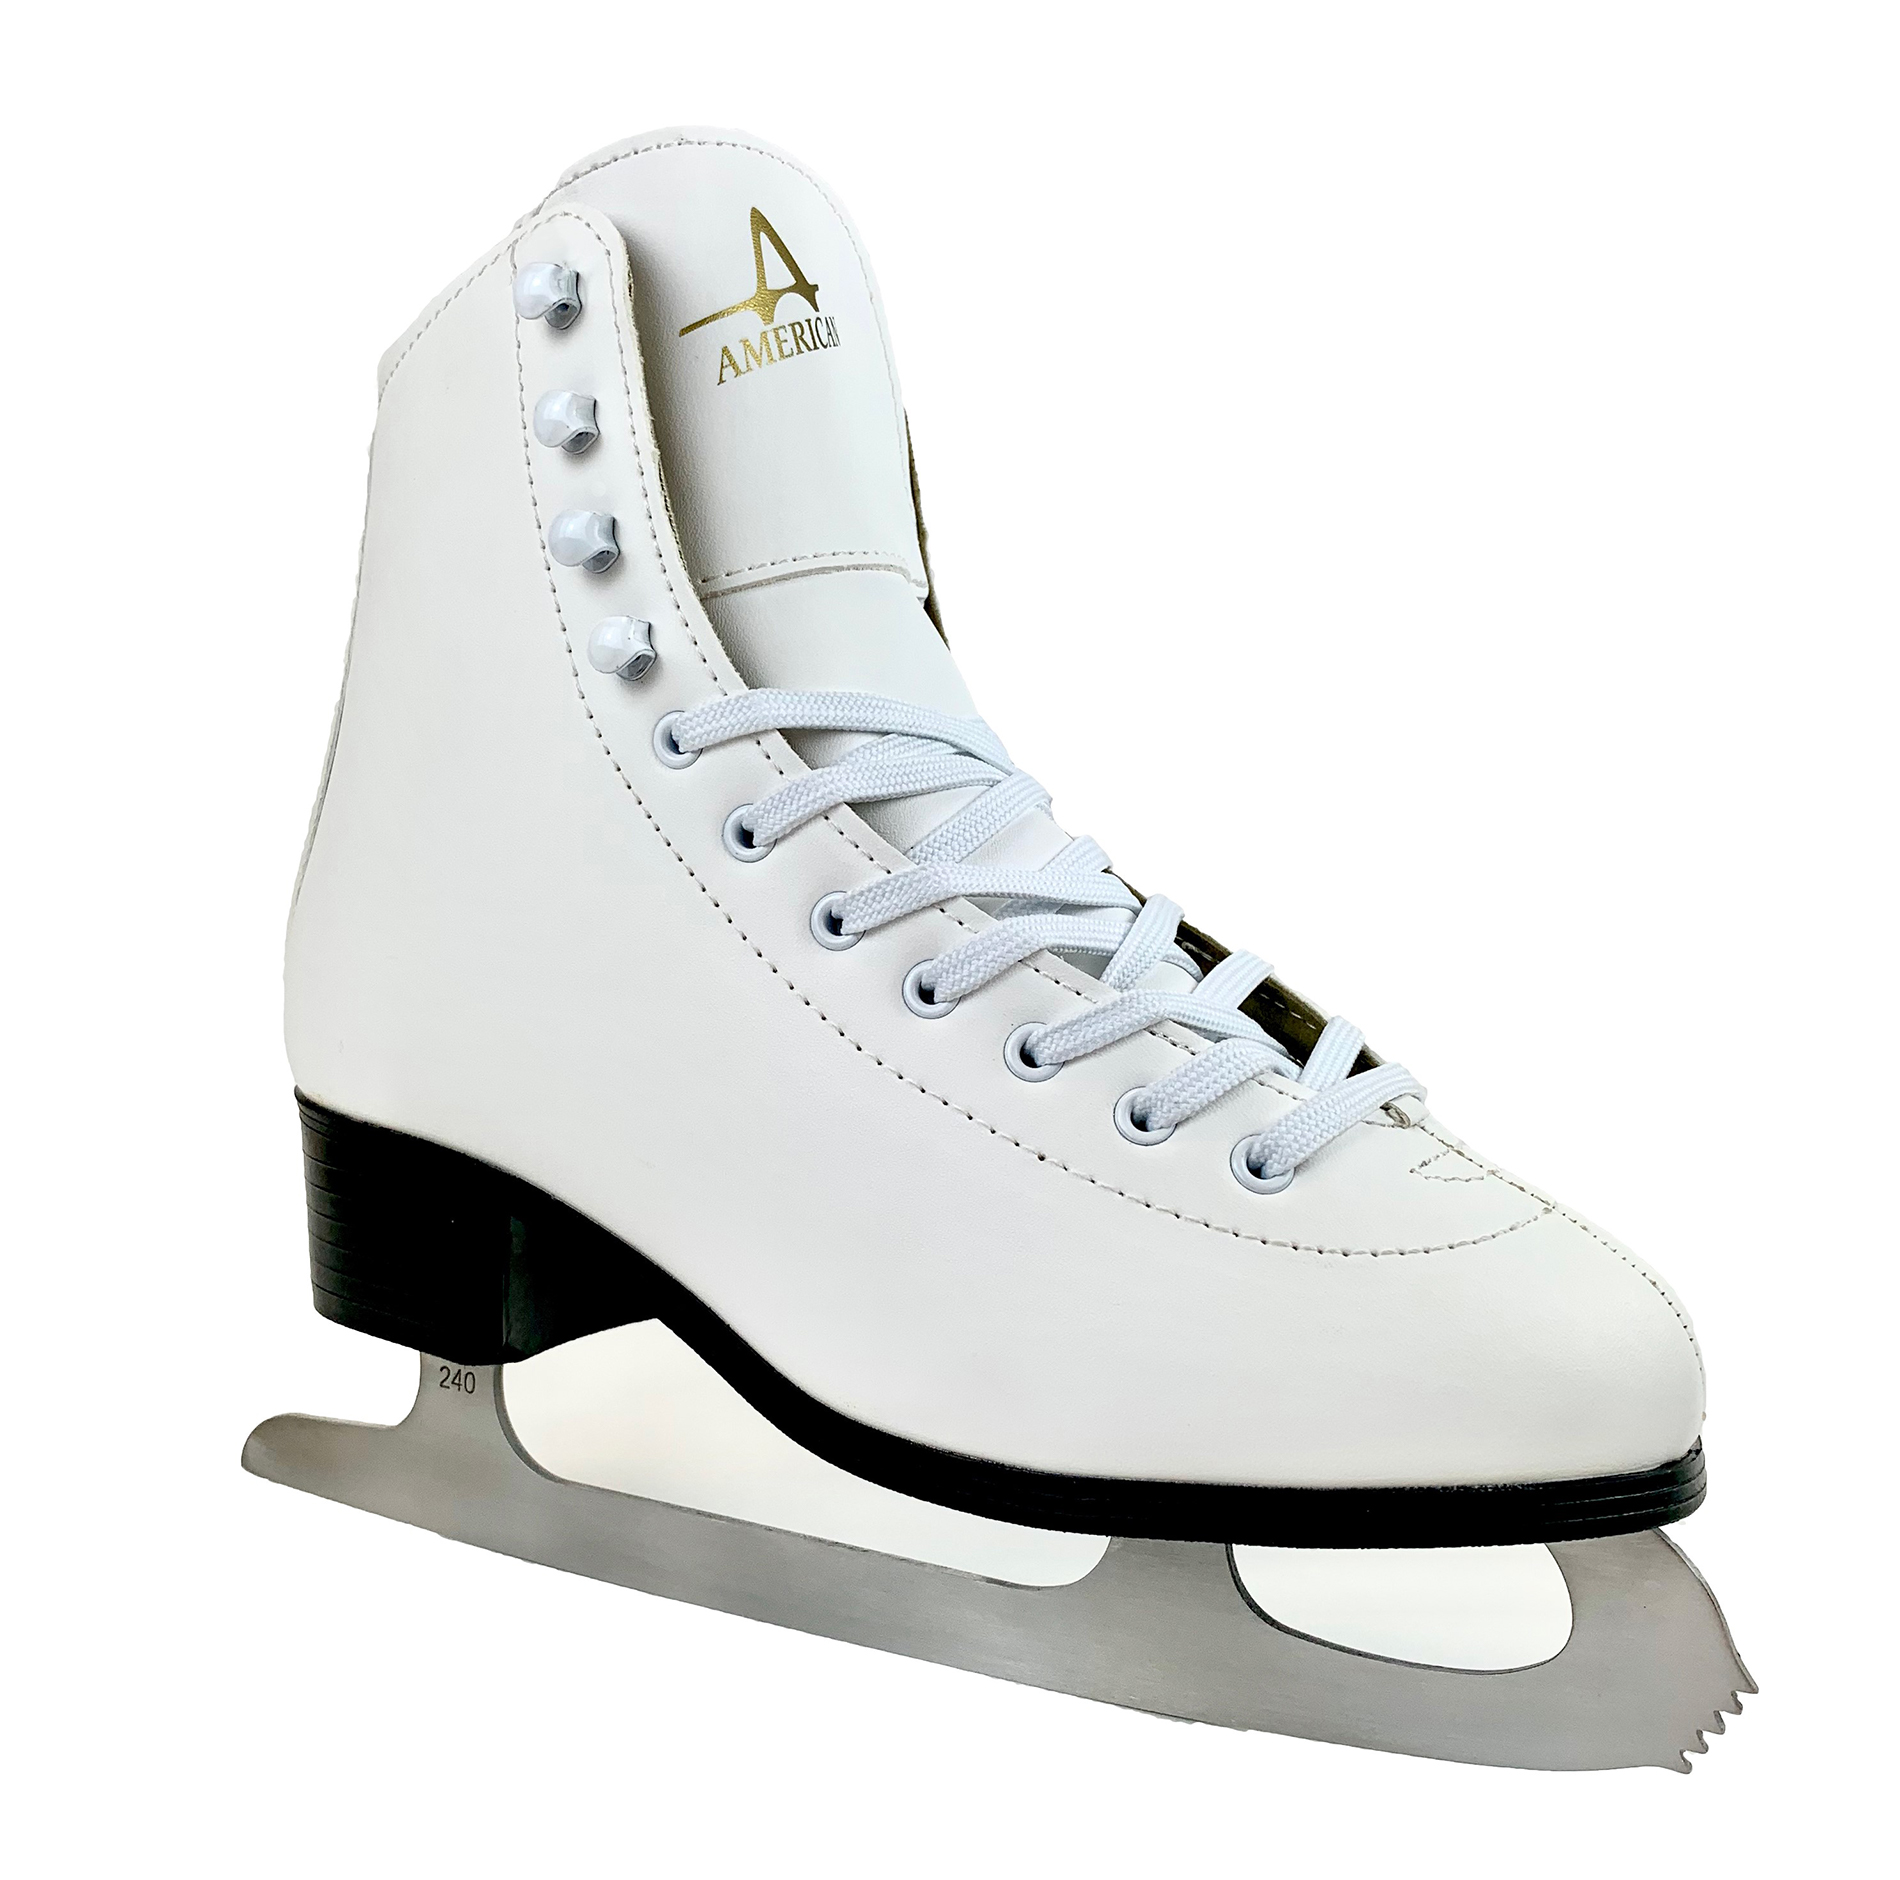 American Athletic Women's Tricot-Lined Ice Skates, Size 8 - image 4 of 5